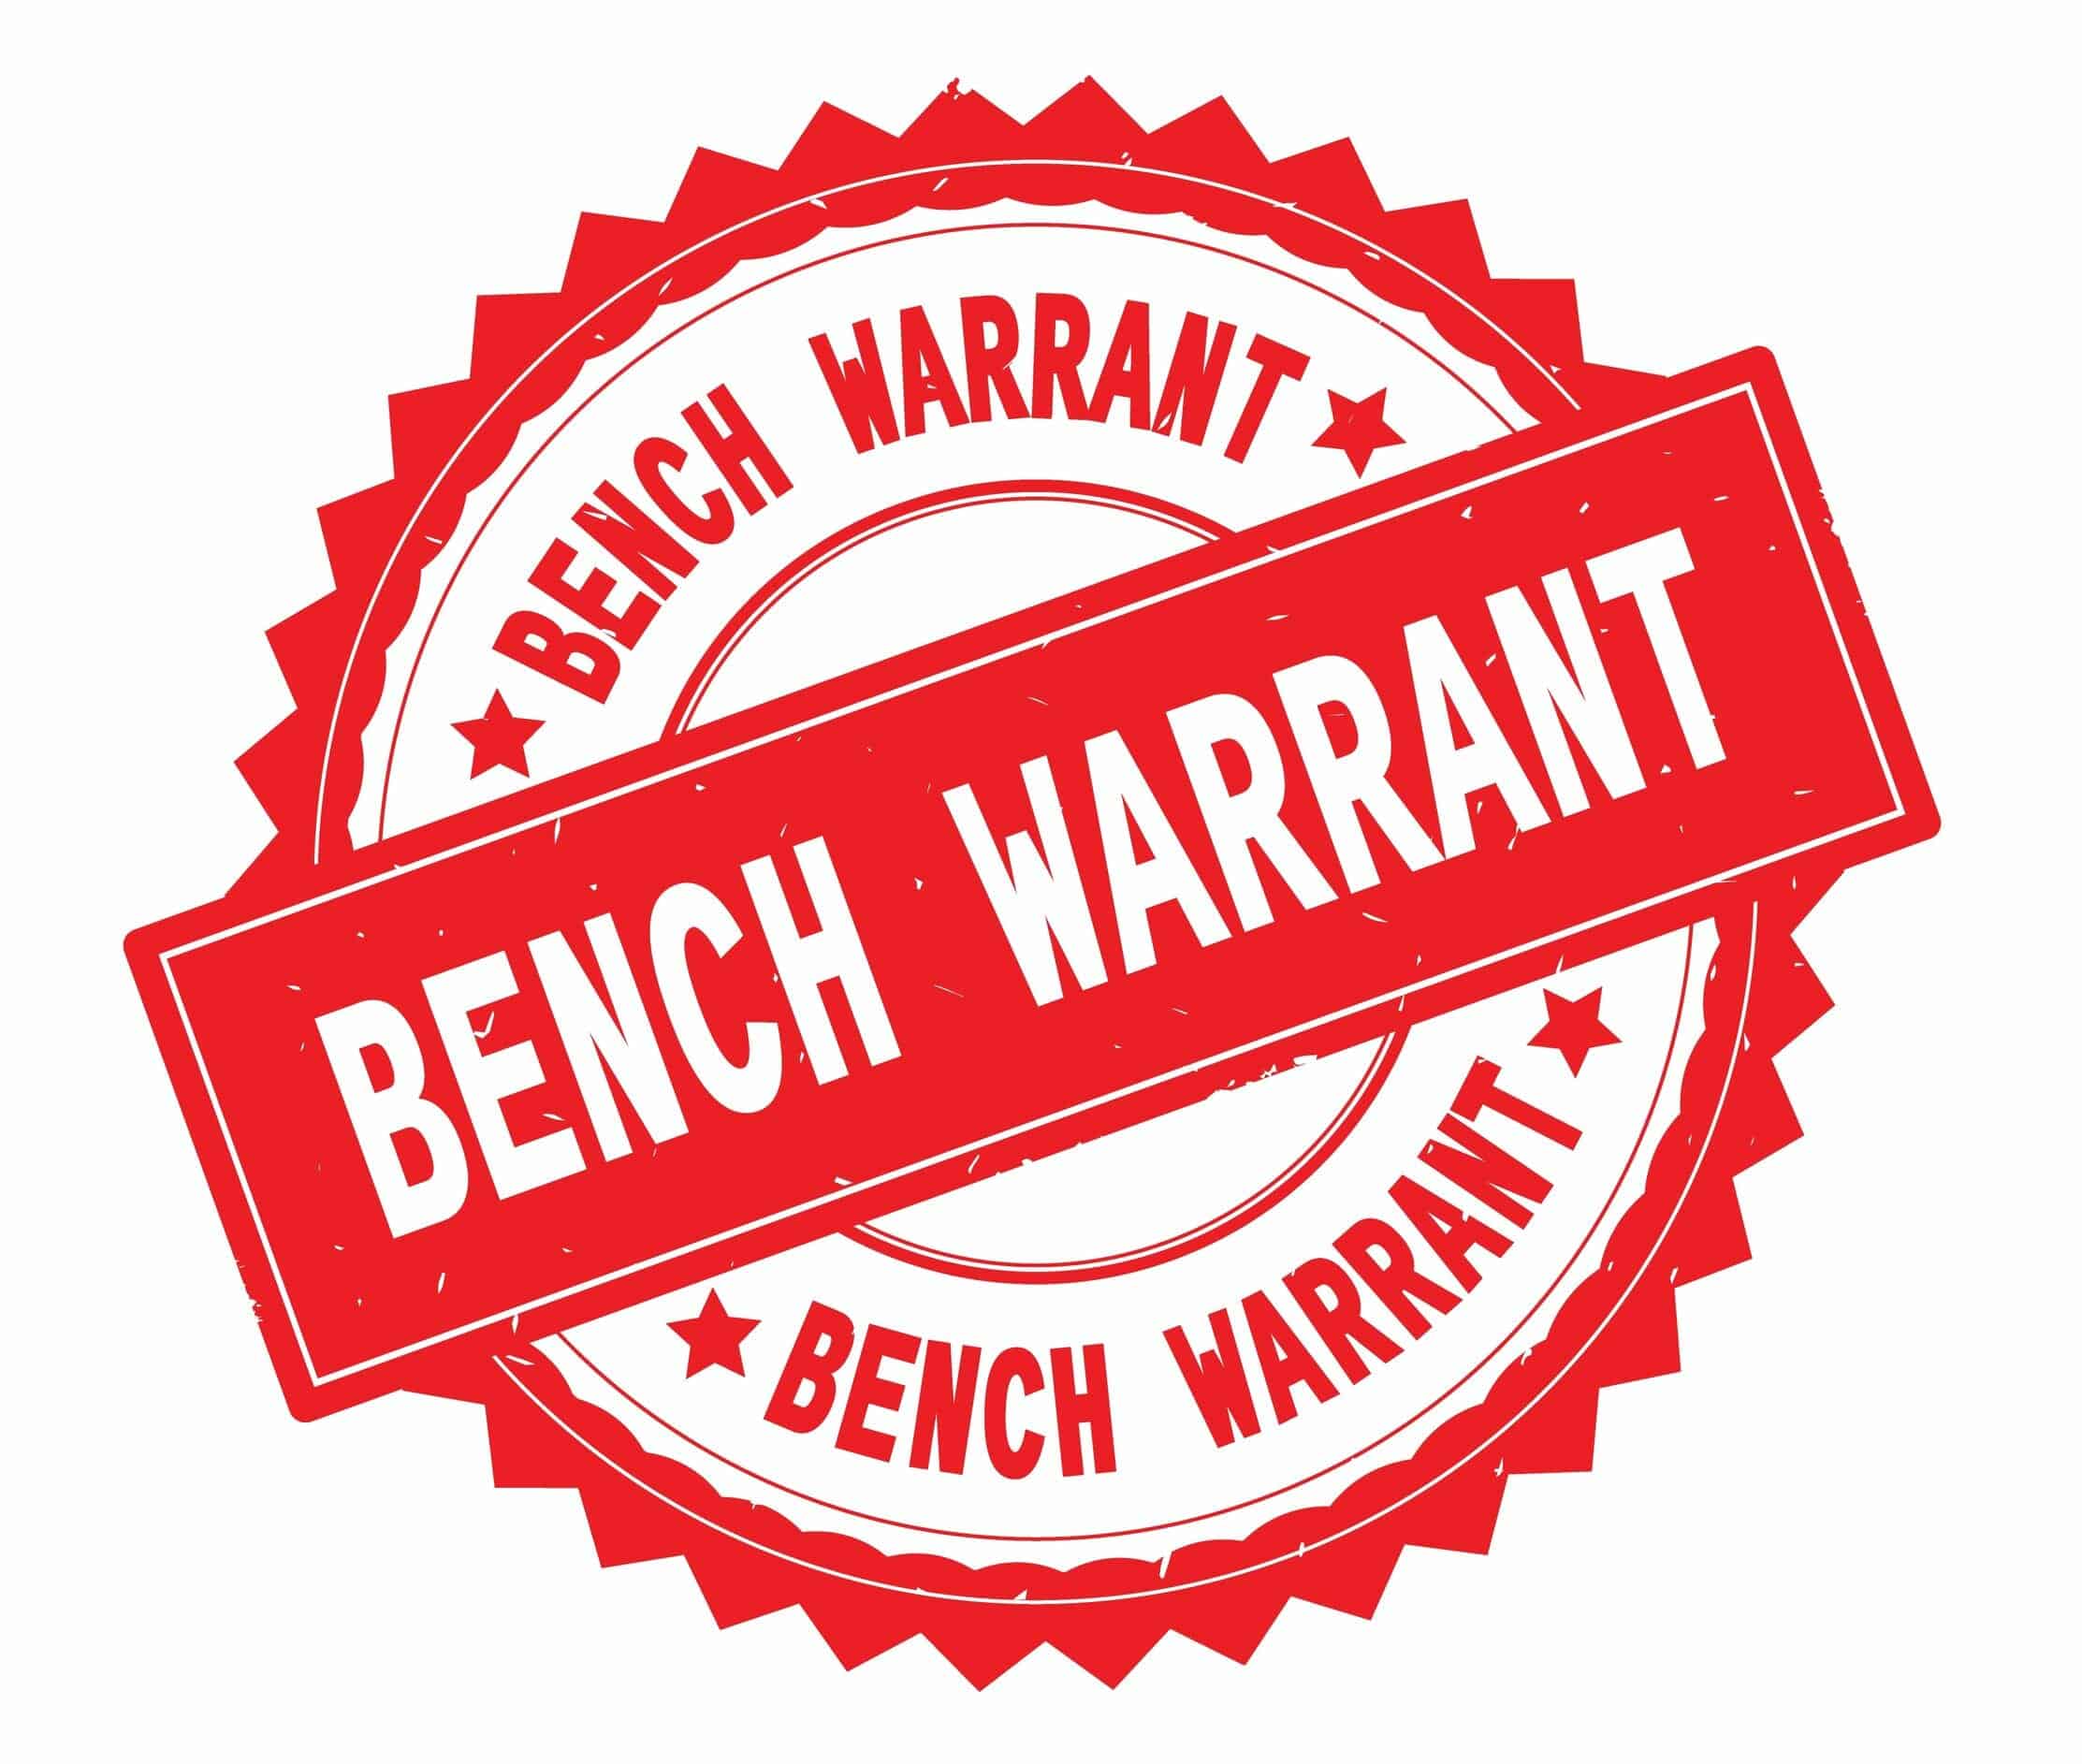 How To Get Rid Of A Warrant Traffic Law Guys Scottsdale Az